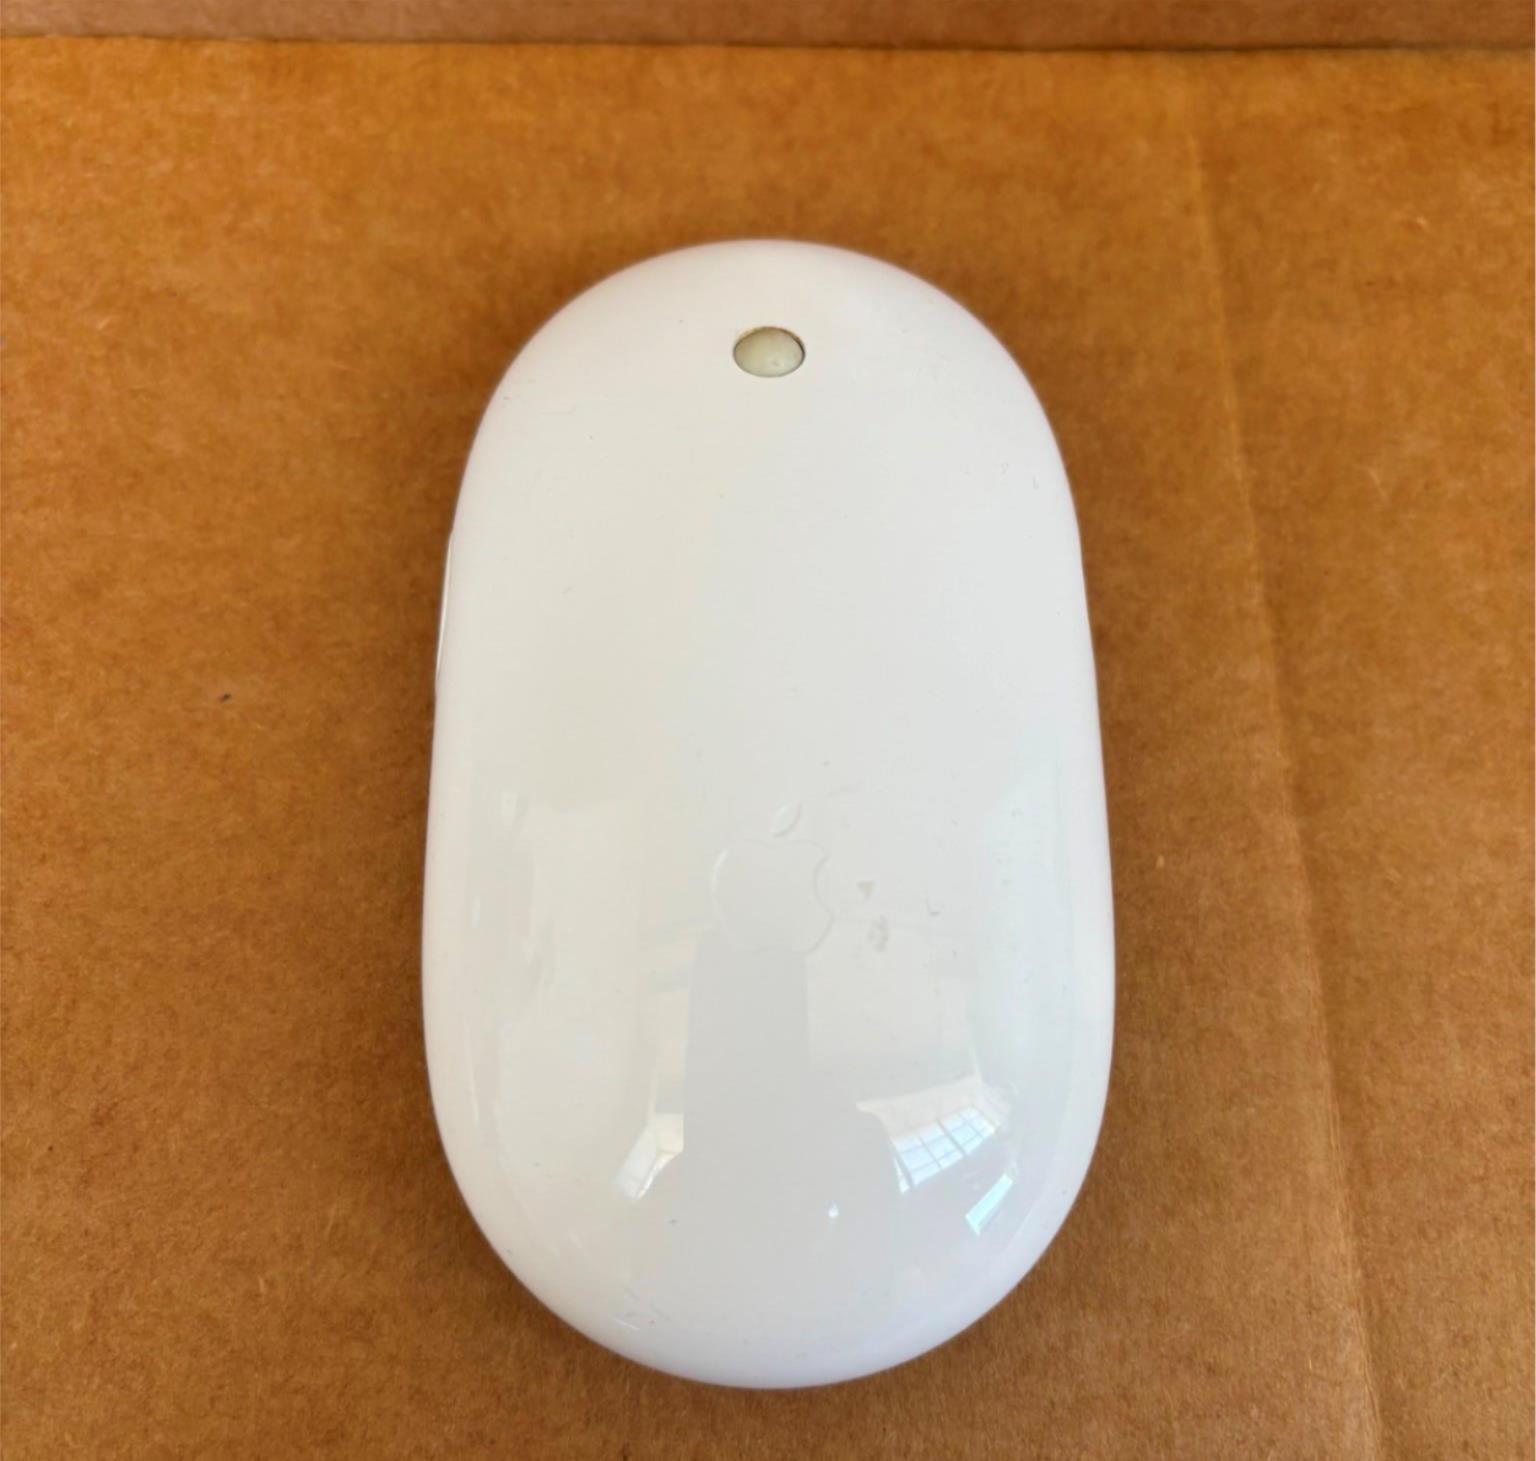 Apple A1197 Wireless Mighty Mouse MA272LL/A Bluetooth Wireless White w/Batteries